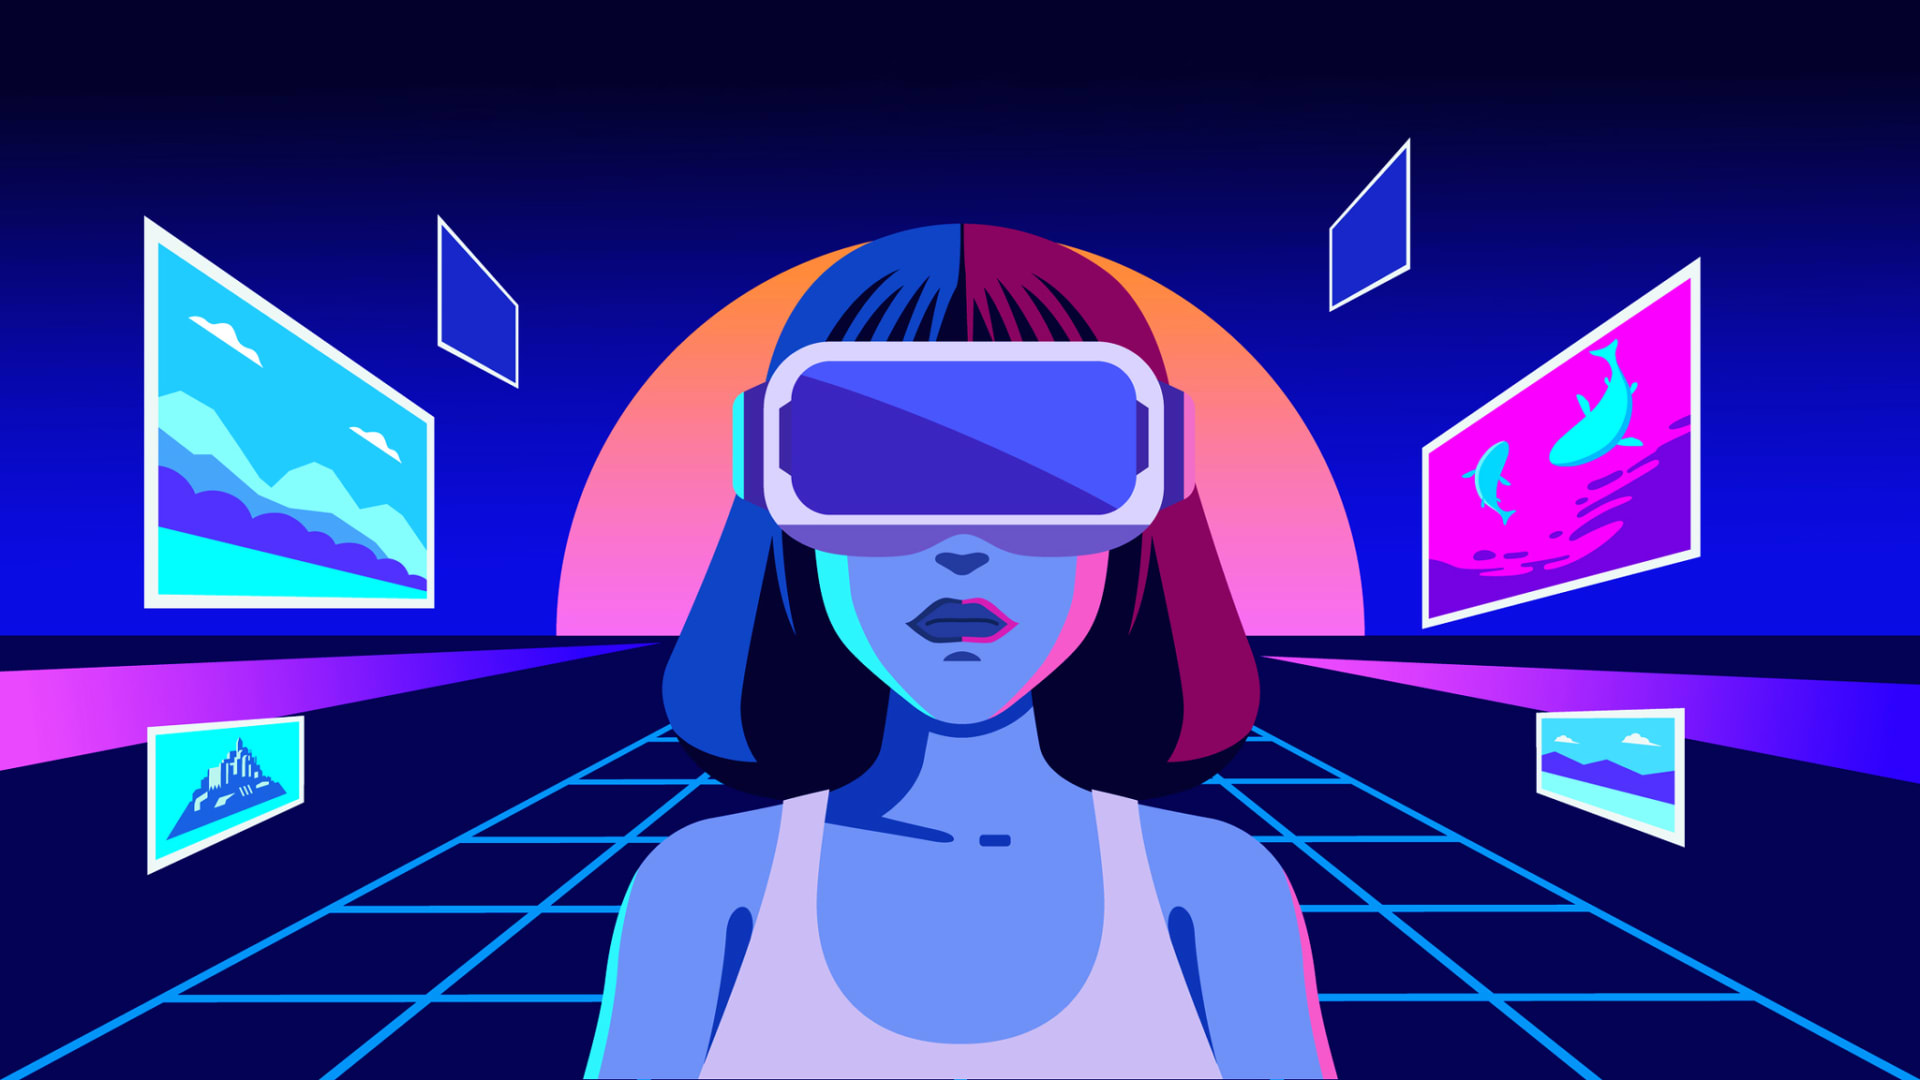 Should I invest in Metaverse